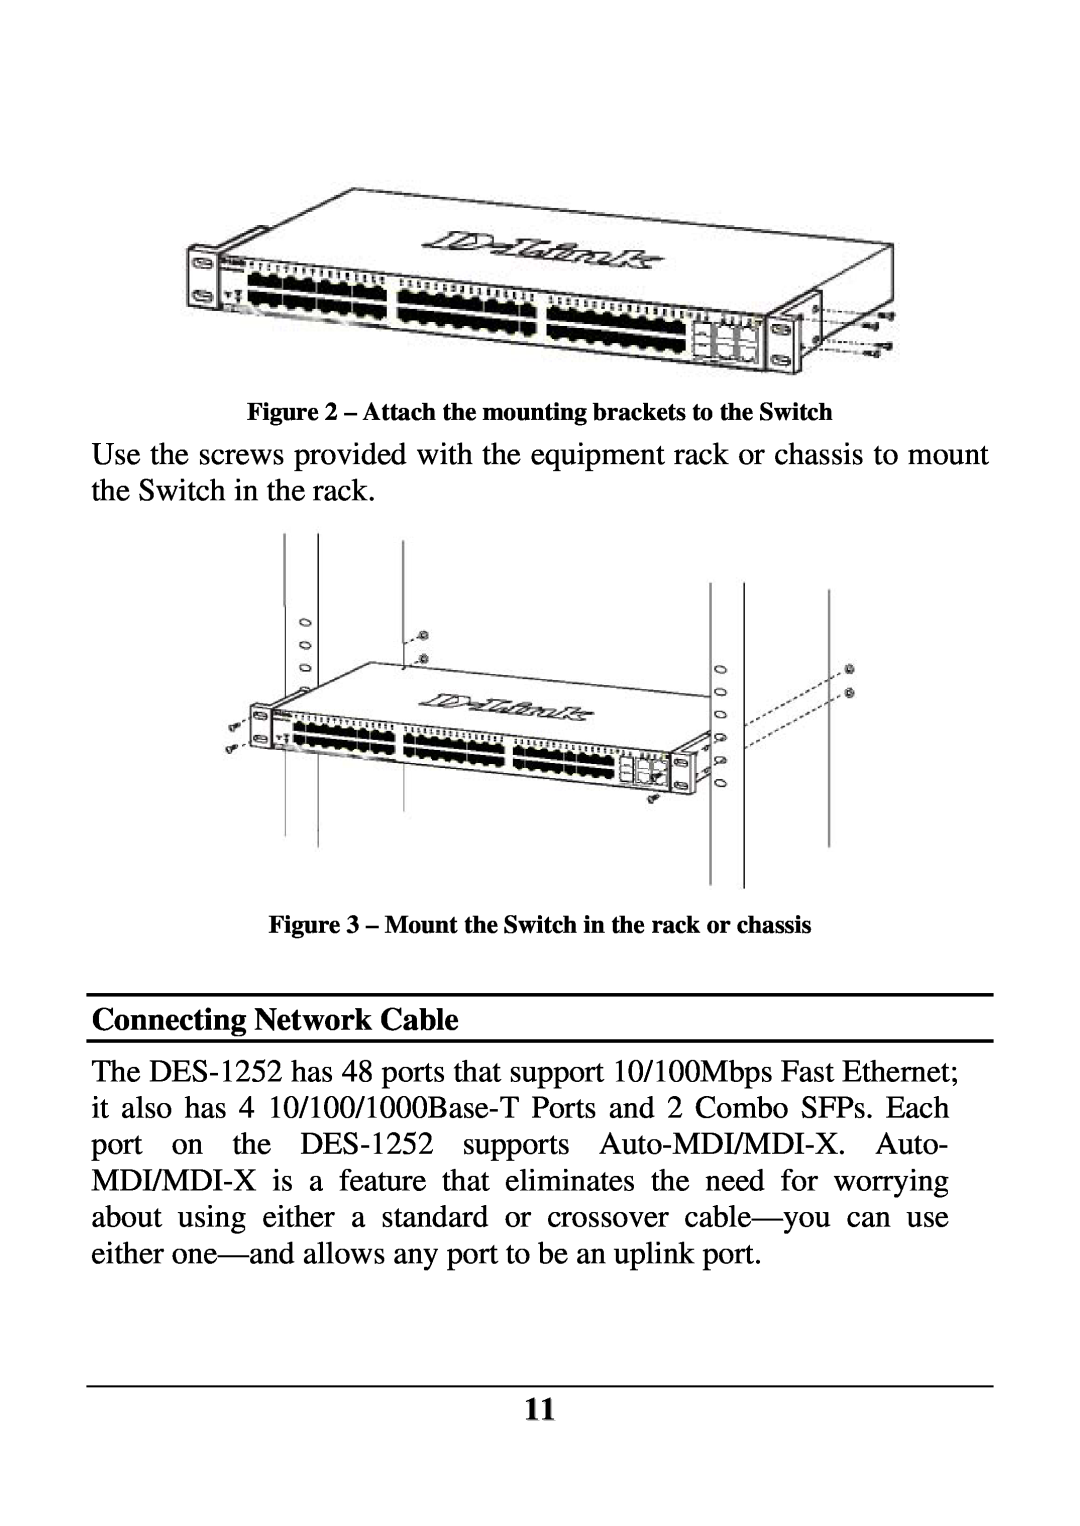 D-Link DES-1252 user manual Connecting Network Cable, Attach the mounting brackets to the Switch 